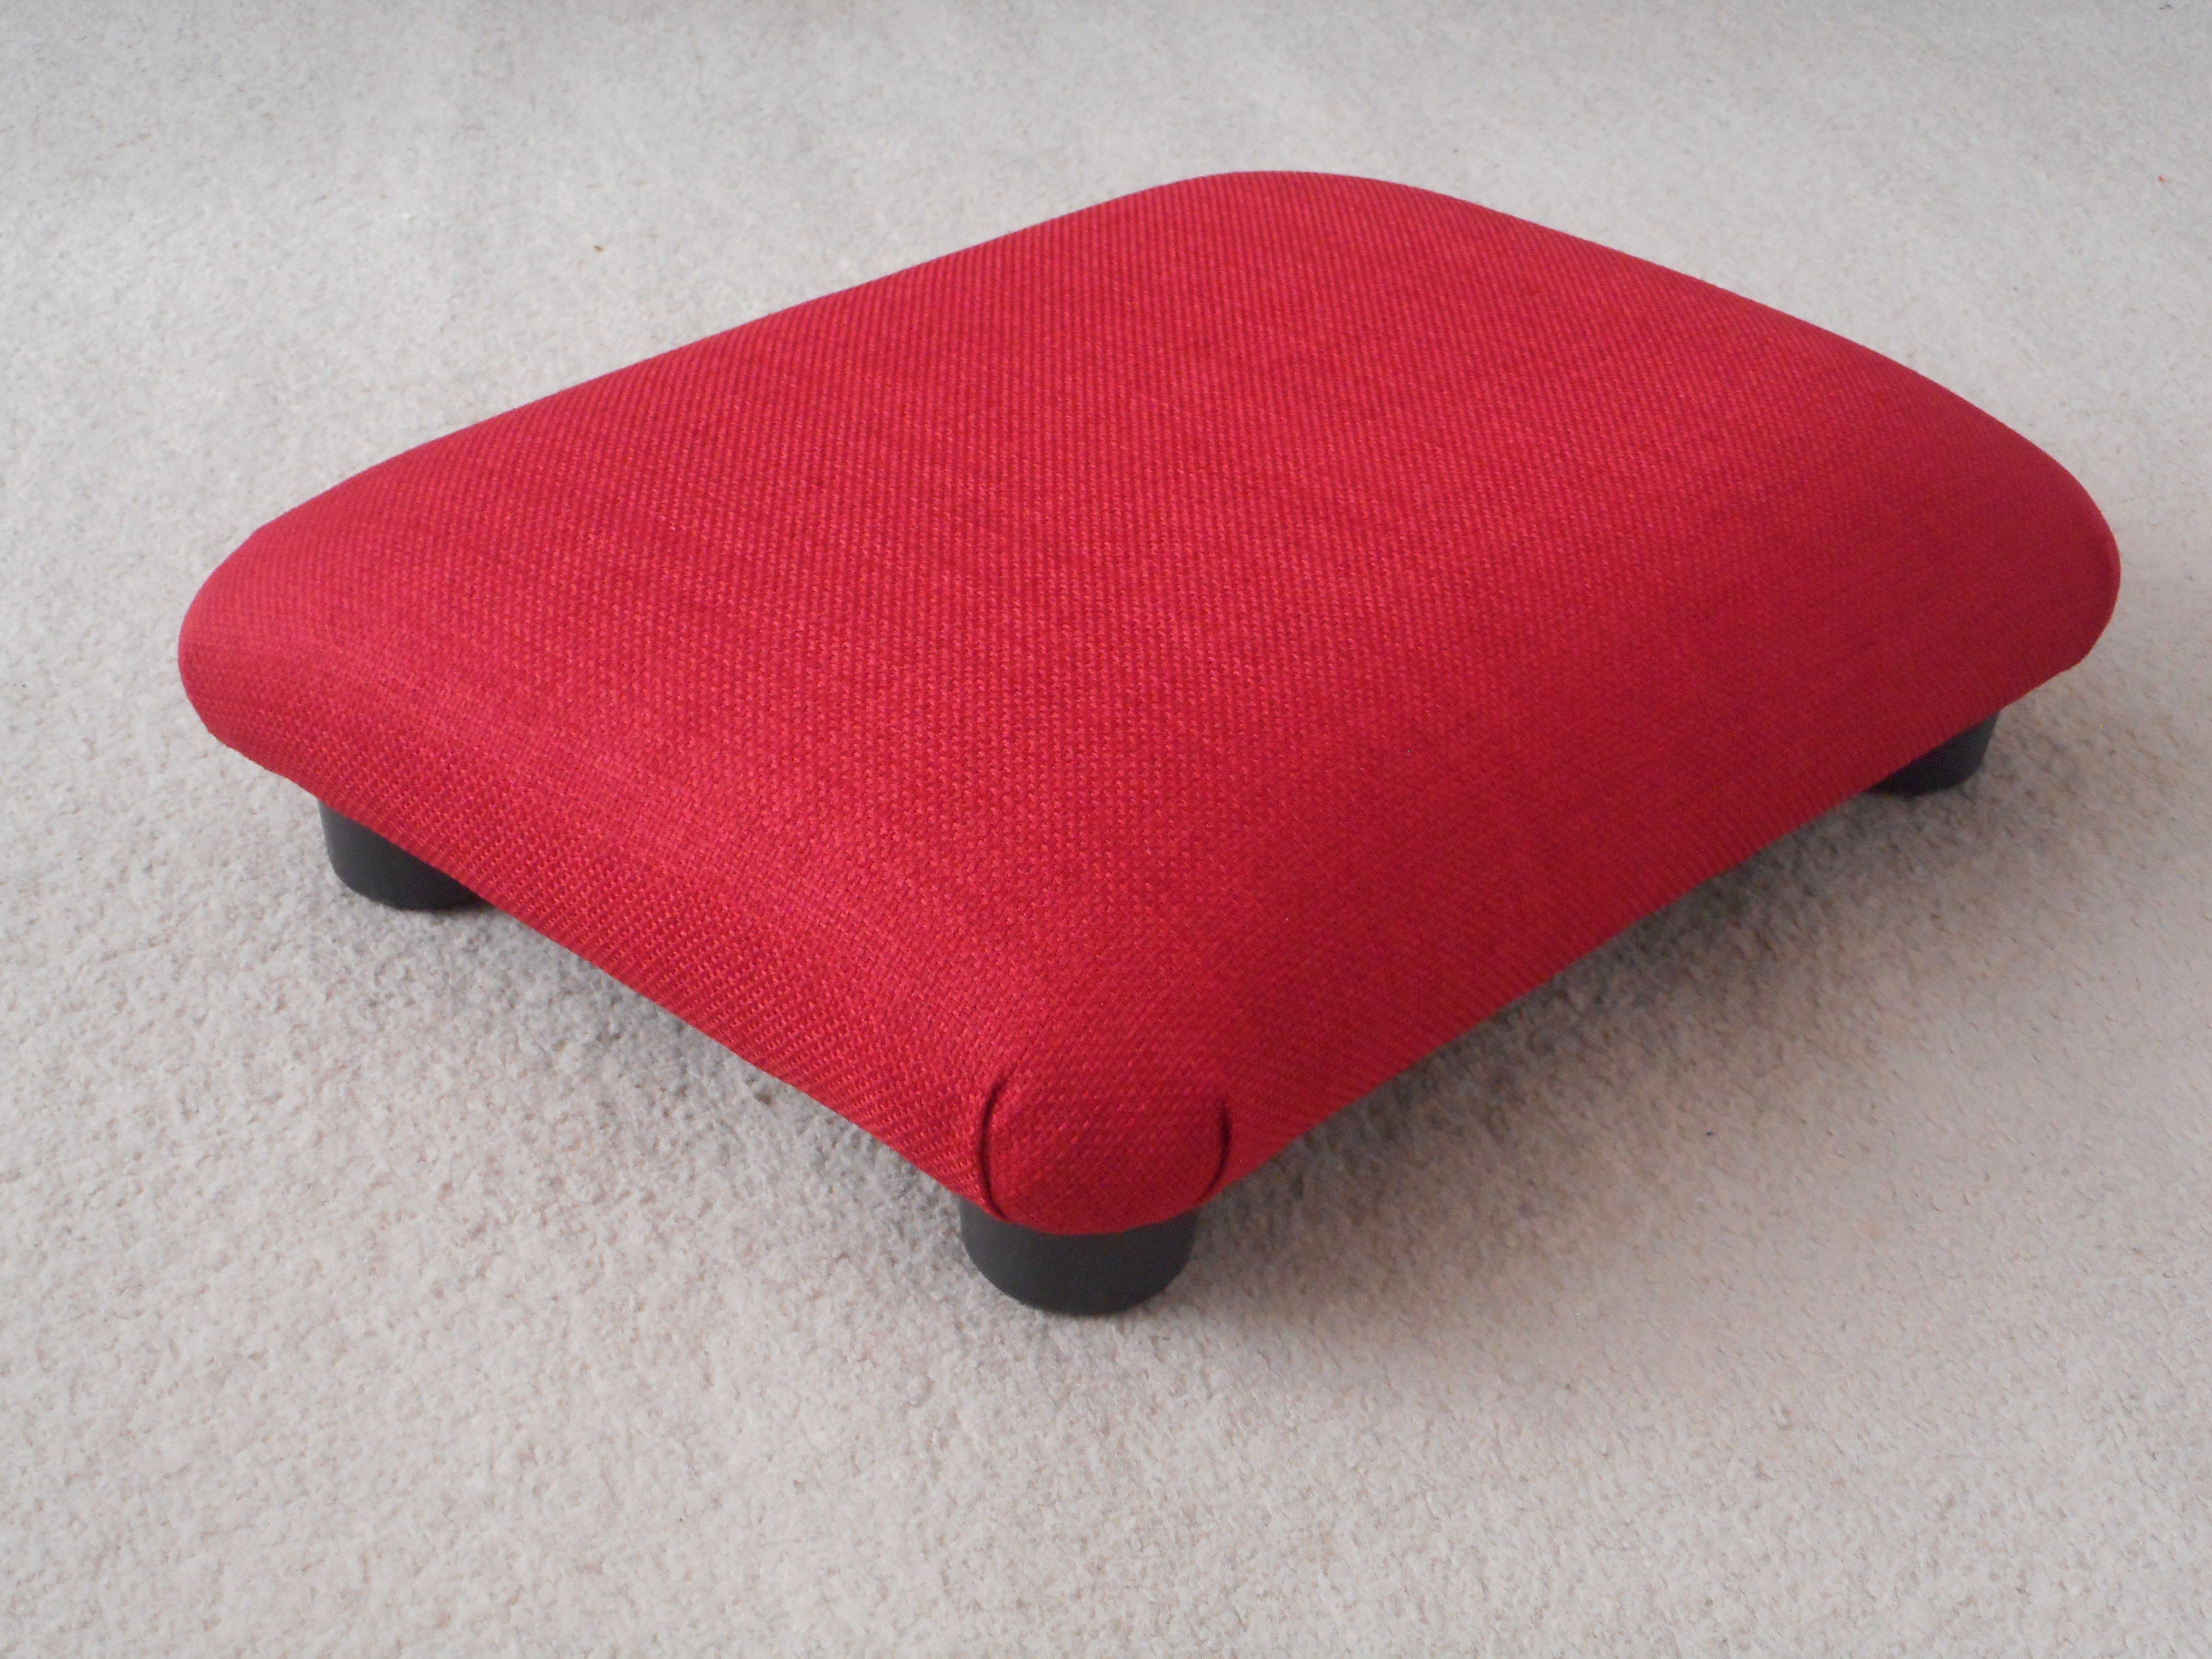 Small Under Desk Plain Footstool Multicolour / 9-10 Cm Small Footstool / 4  Upholstered Foot Stool for Mum Dad / Handmade Footrest Bed Step 